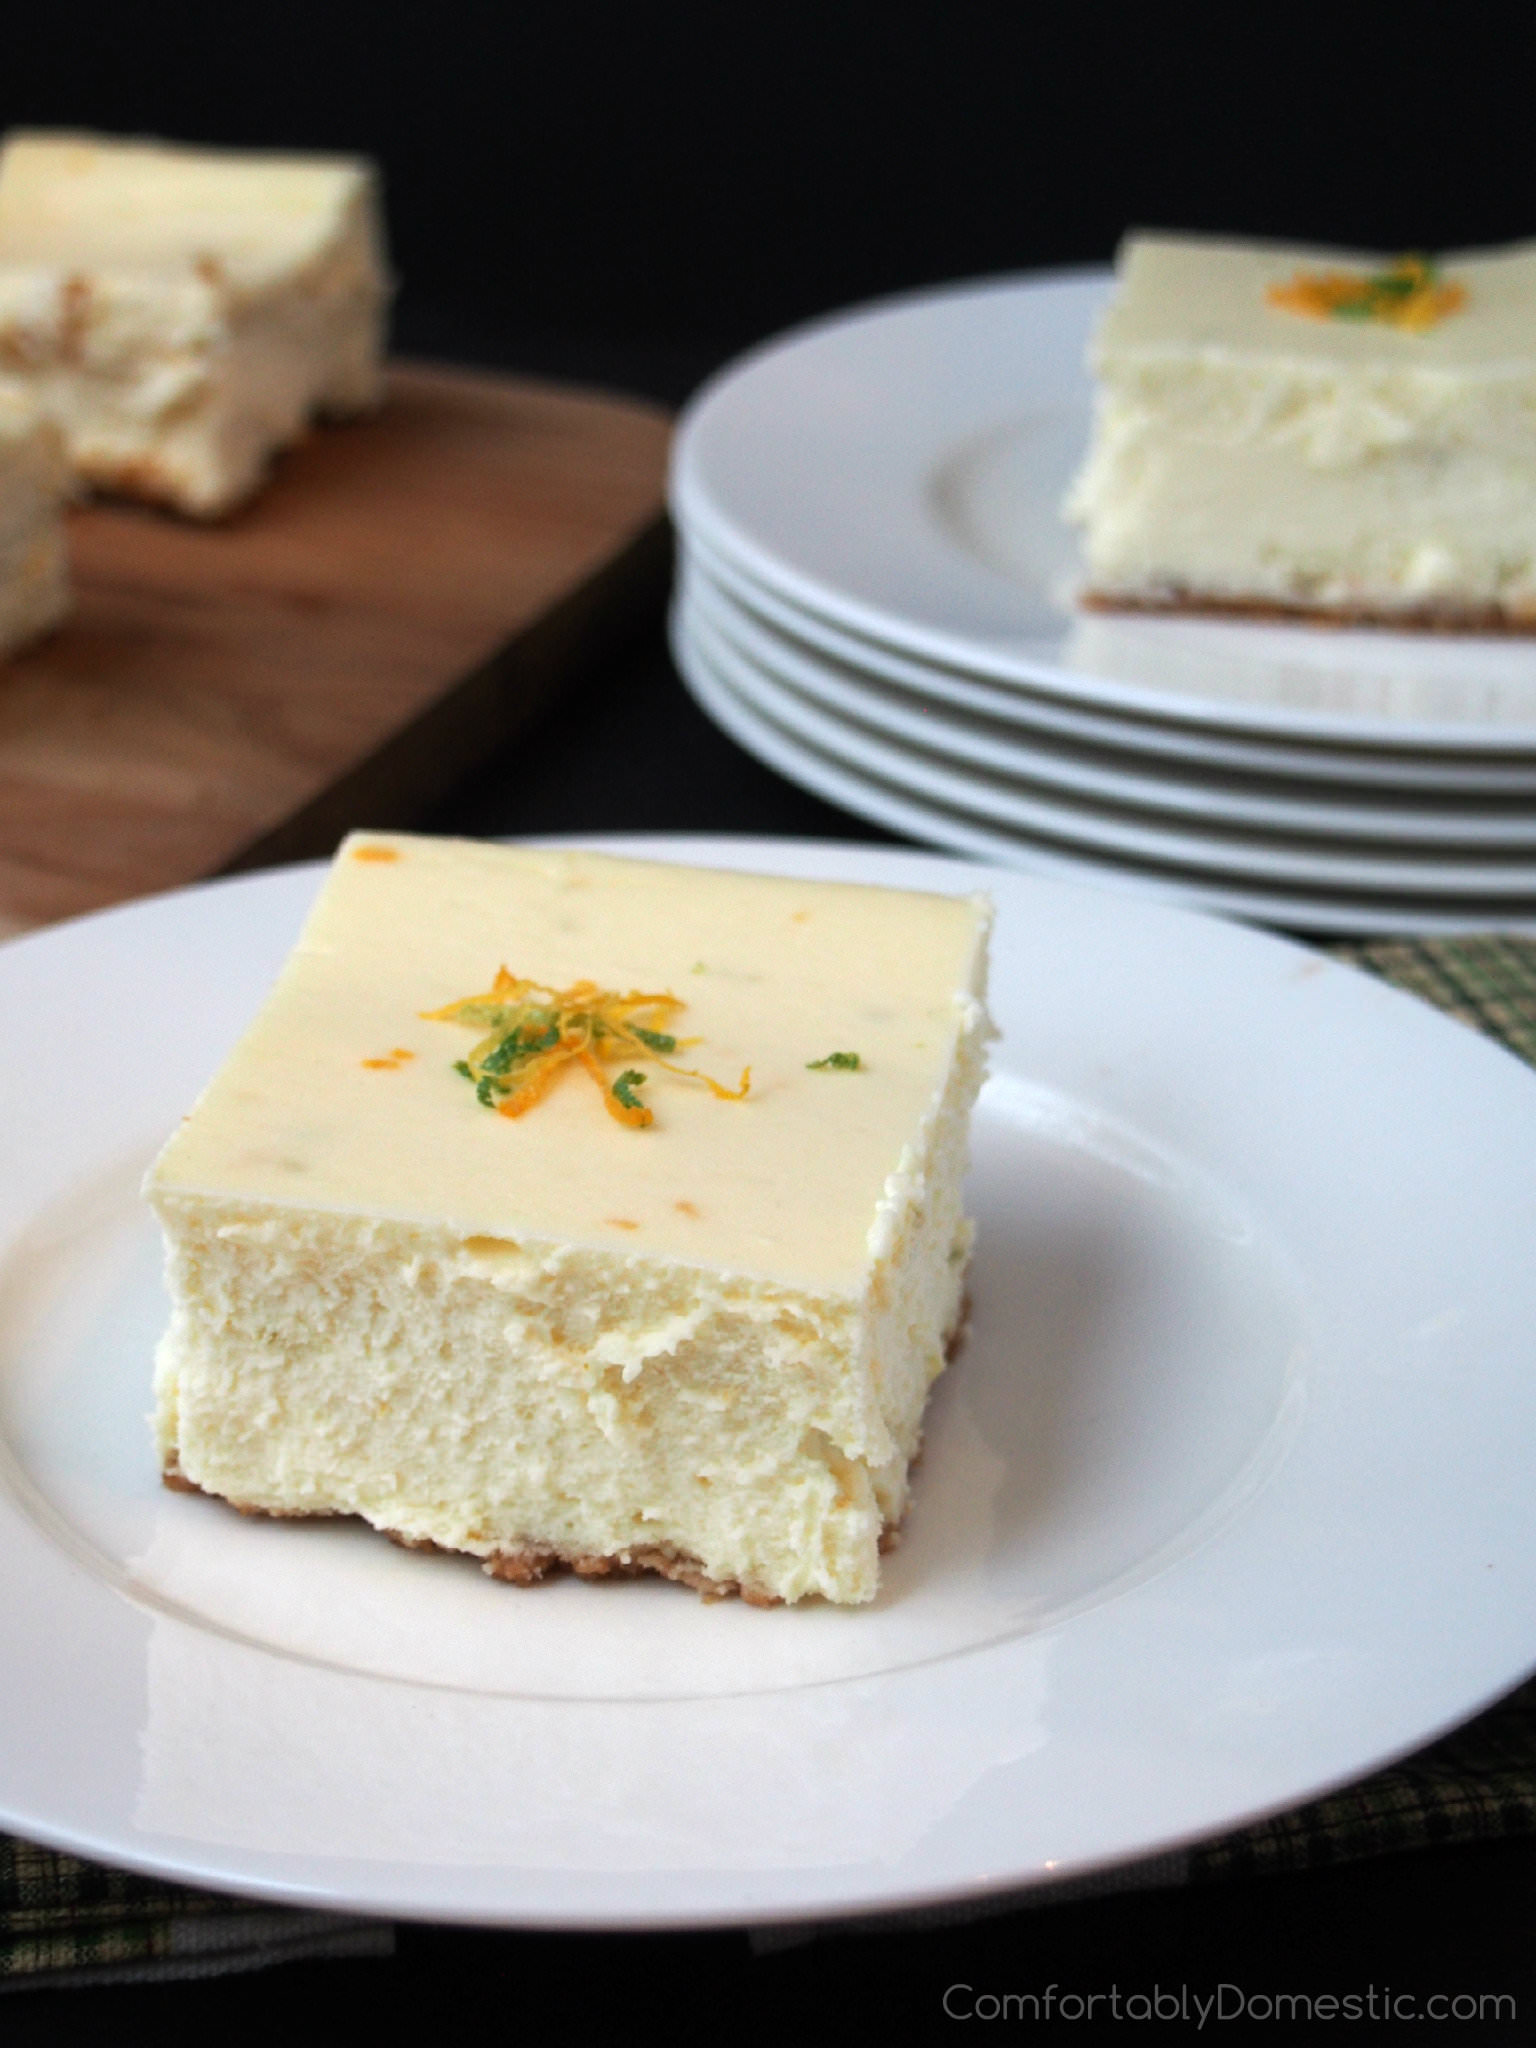 Triple Citrus Cheesecake - Classic New York style cheesecake infused with the tangy flavors of lemon, lime, and orange is made easy to share with a crowd. | ComfortablyDomestic.com